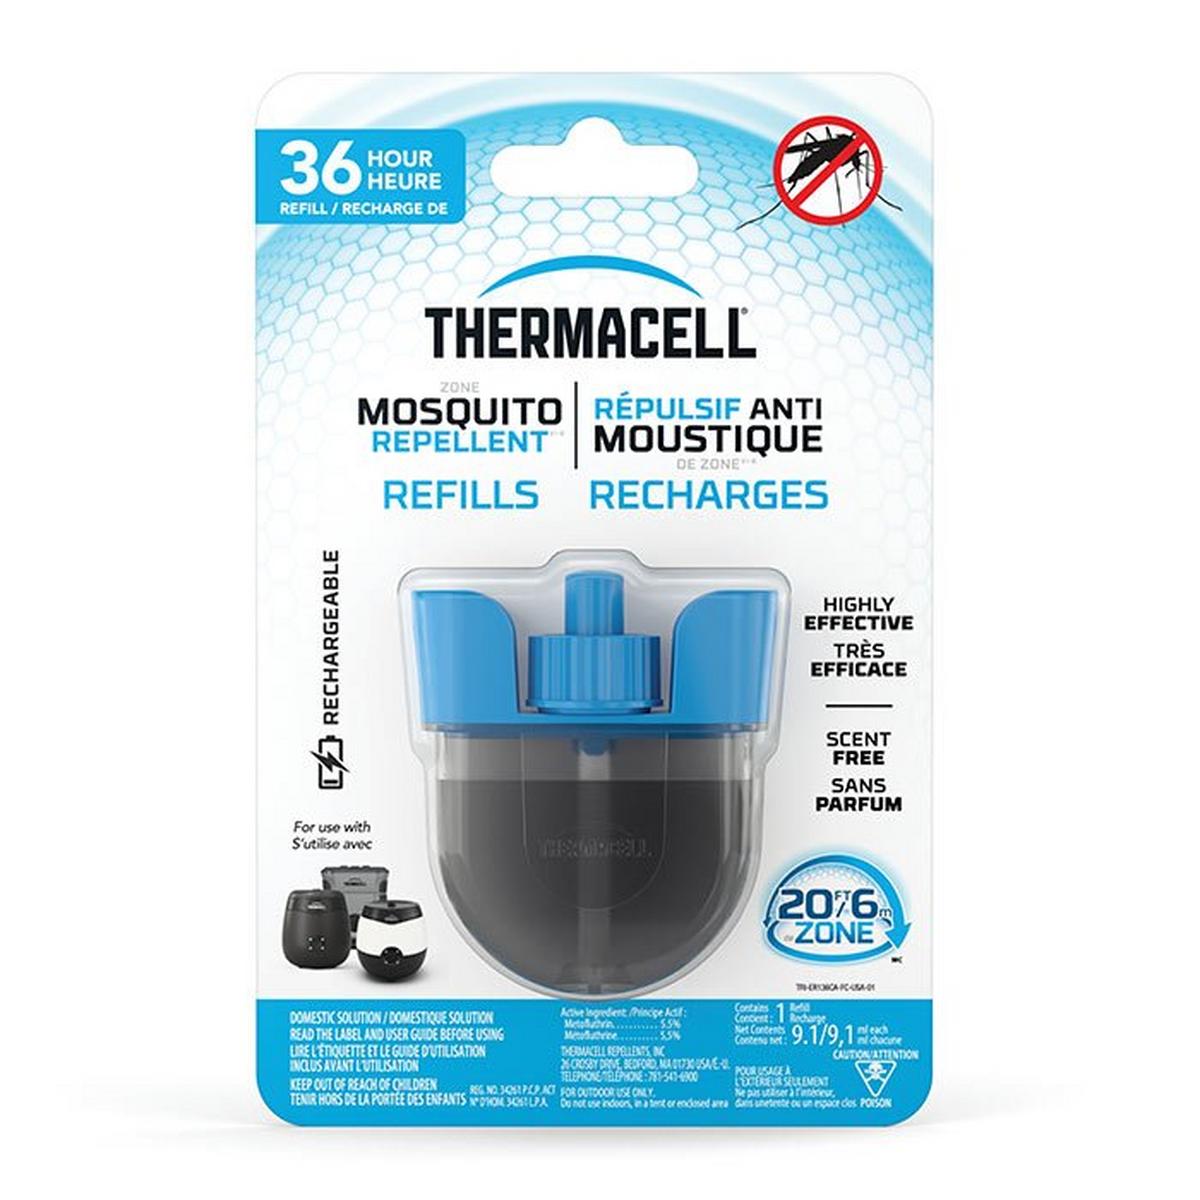 Rechargeable Mosquito Repellent Refill (36 hours)